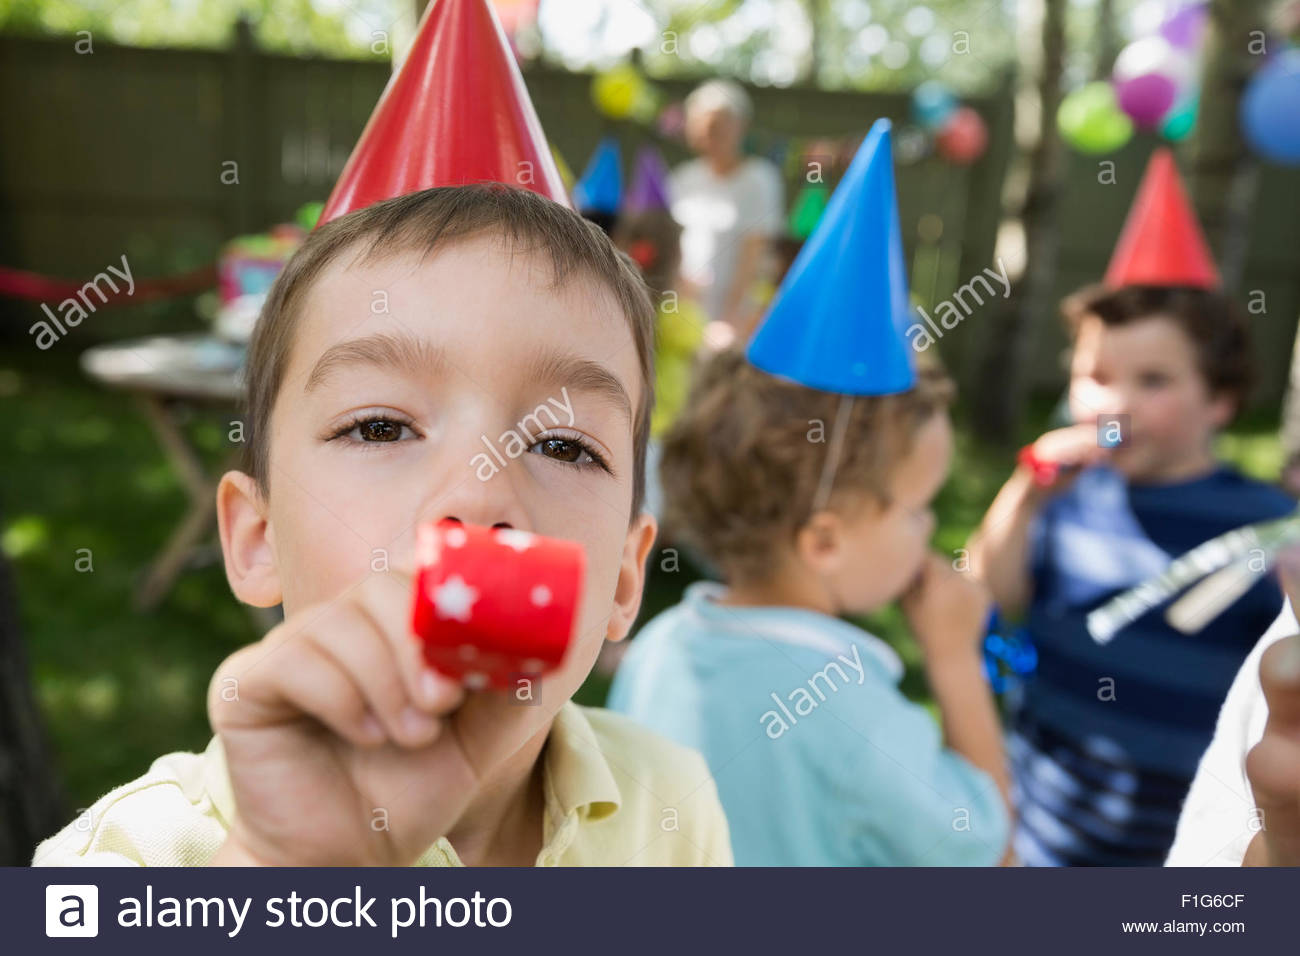 Portrait boy blowing birthday party favor Stock Photo